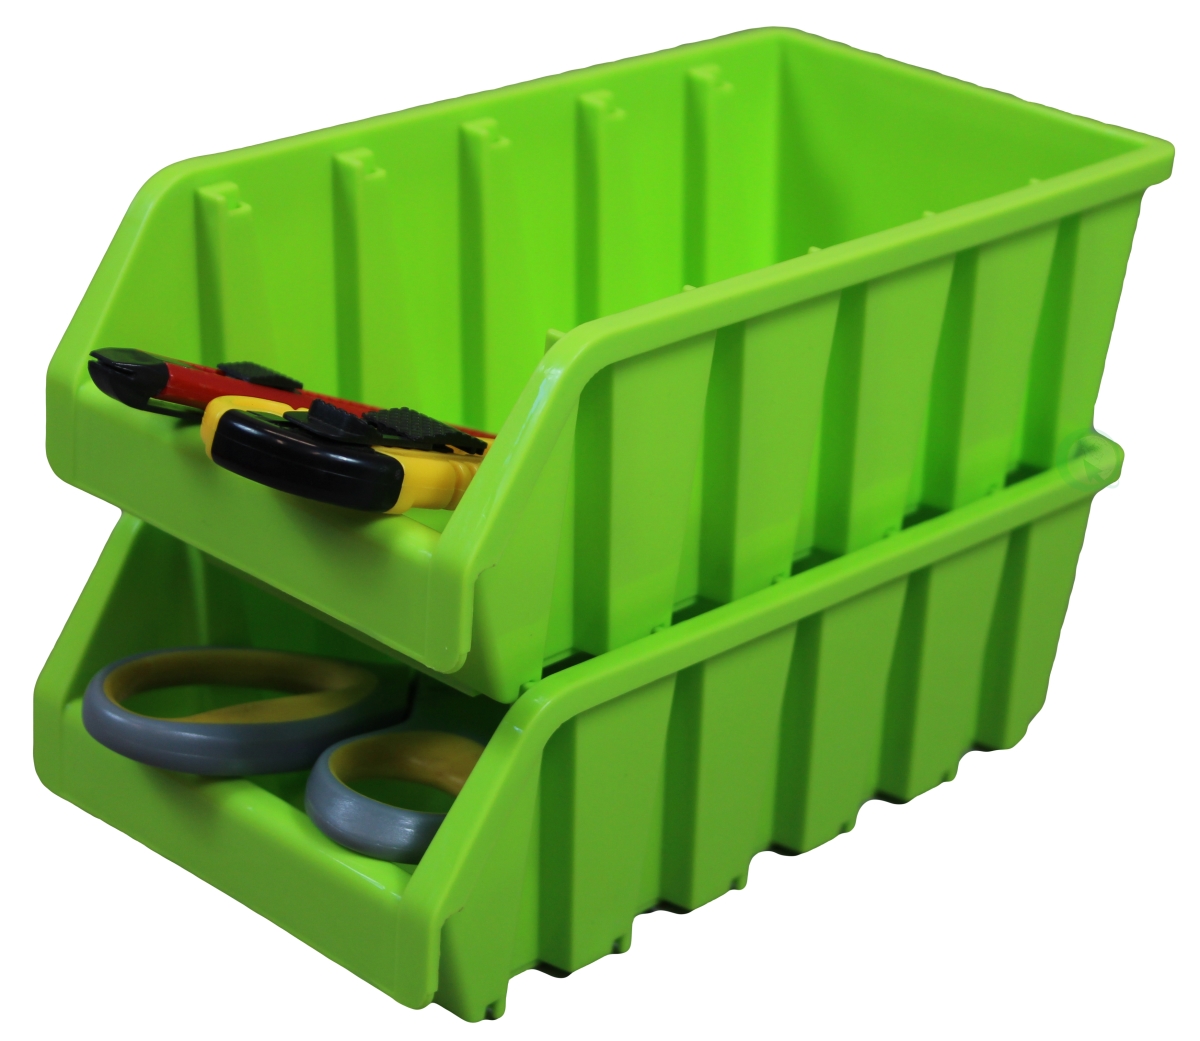 Picture of Basicwise QI003255G Set of 2 Plastic Storage Stacking Bins, Green